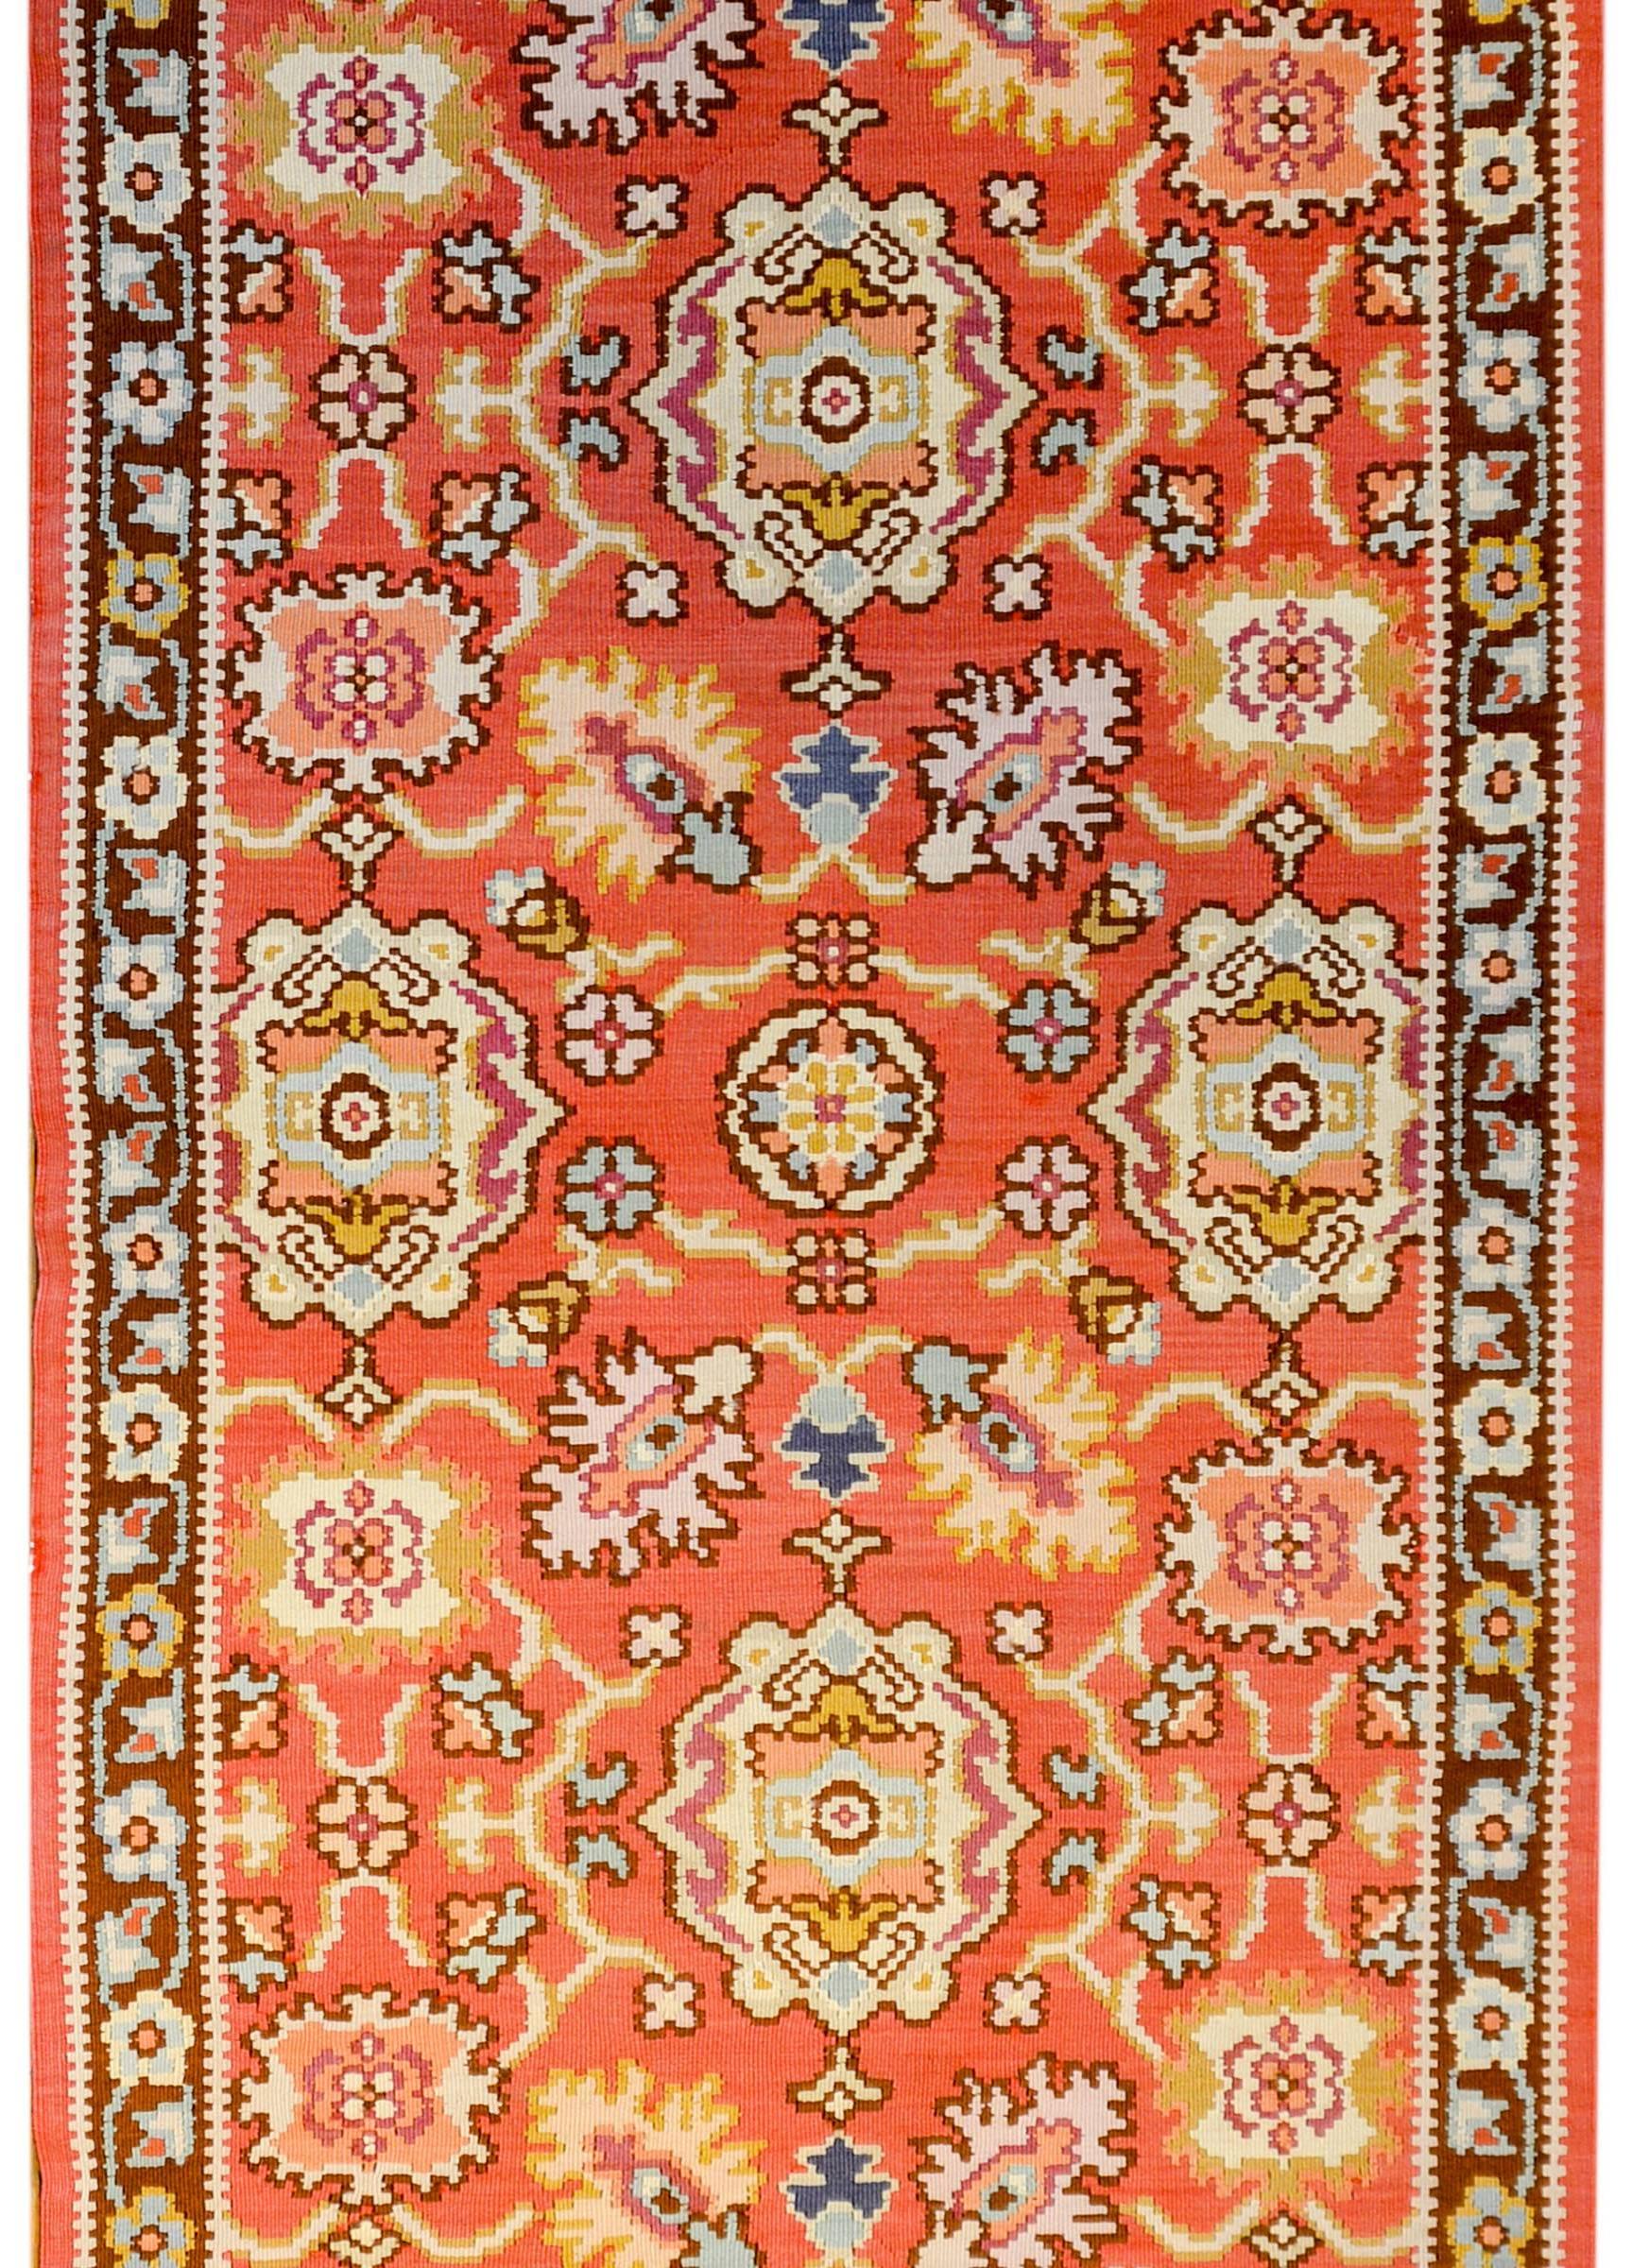 A bold mid-20th century Turkish Bessarabian runner with all-over trellis floral and vine pattern woven in crimson, dark burgundy, light and dark indigo, gold, and white vegetable dyed wool. The border is sweet, with a smaller scale floral and vine